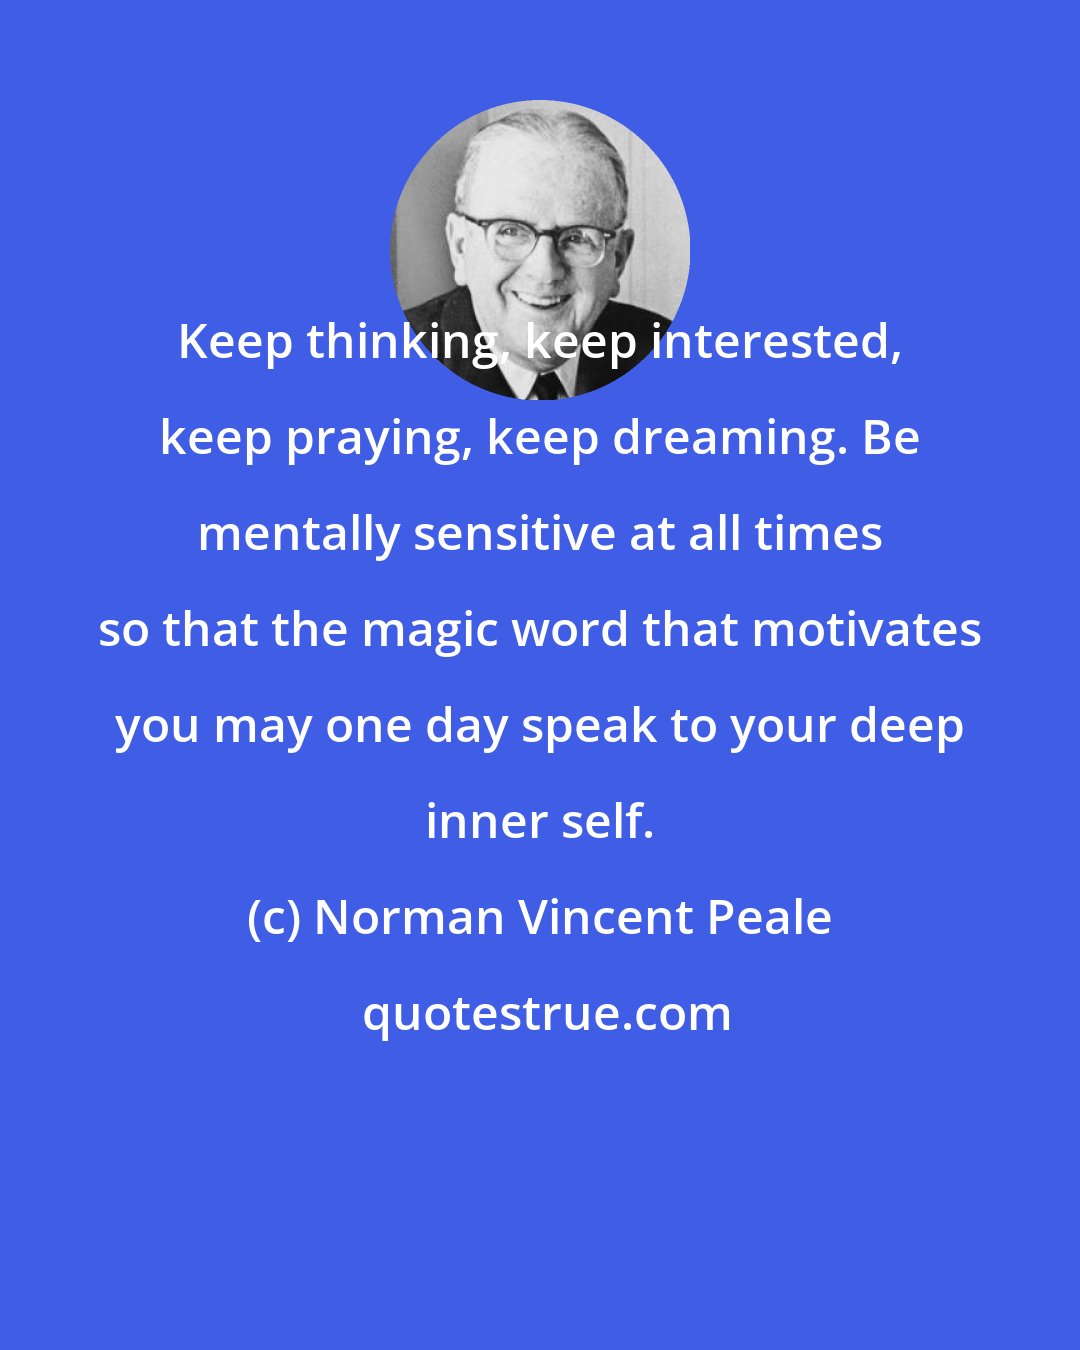 Norman Vincent Peale: Keep thinking, keep interested, keep praying, keep dreaming. Be mentally sensitive at all times so that the magic word that motivates you may one day speak to your deep inner self.